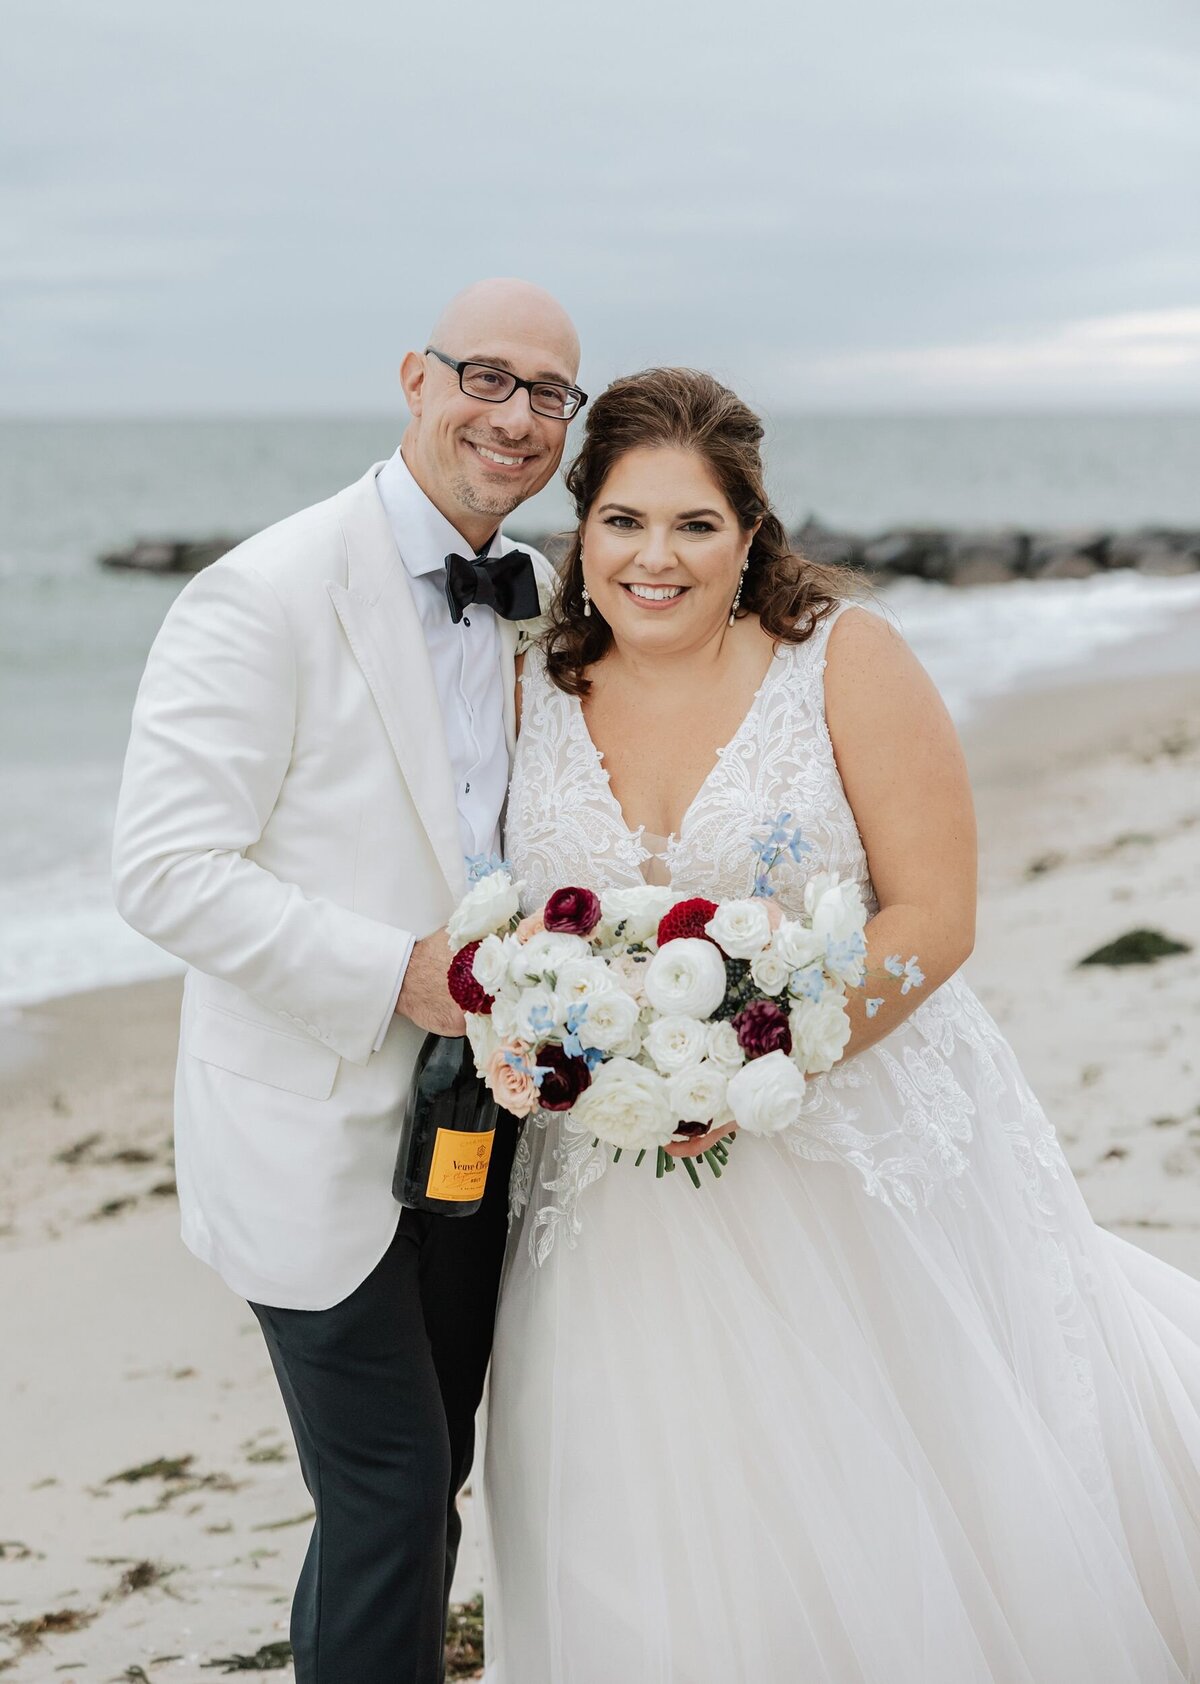 Bride and groom on beach with champagne